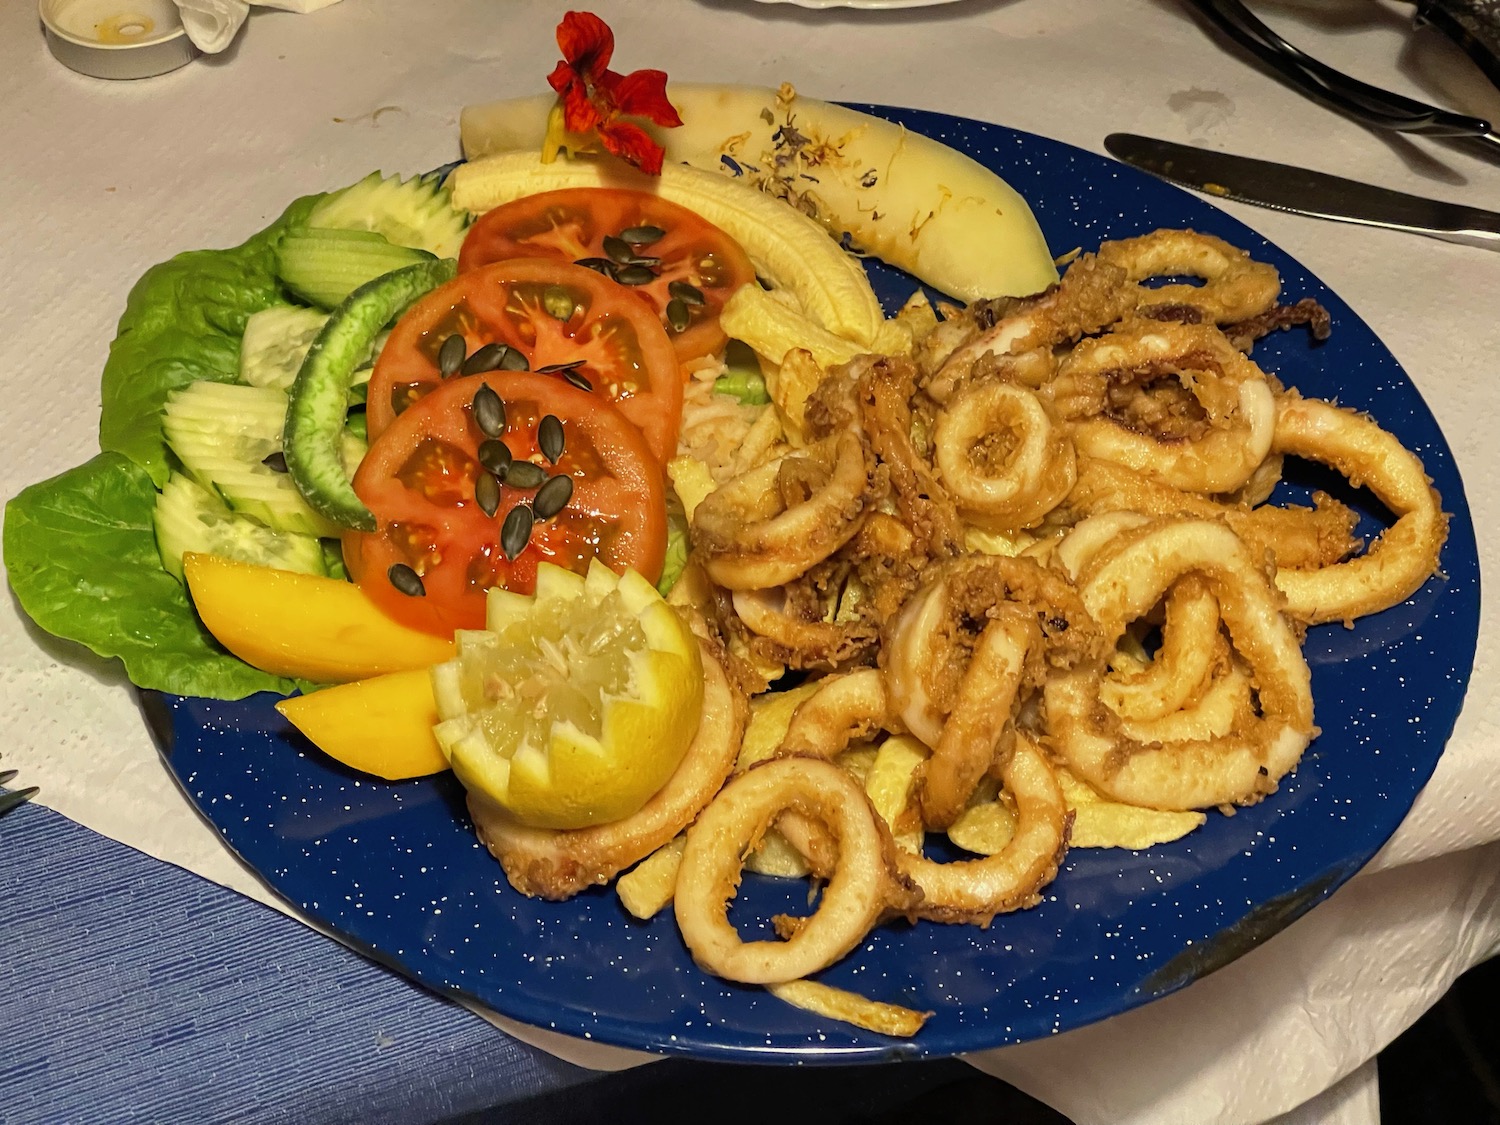 a plate of food on a table